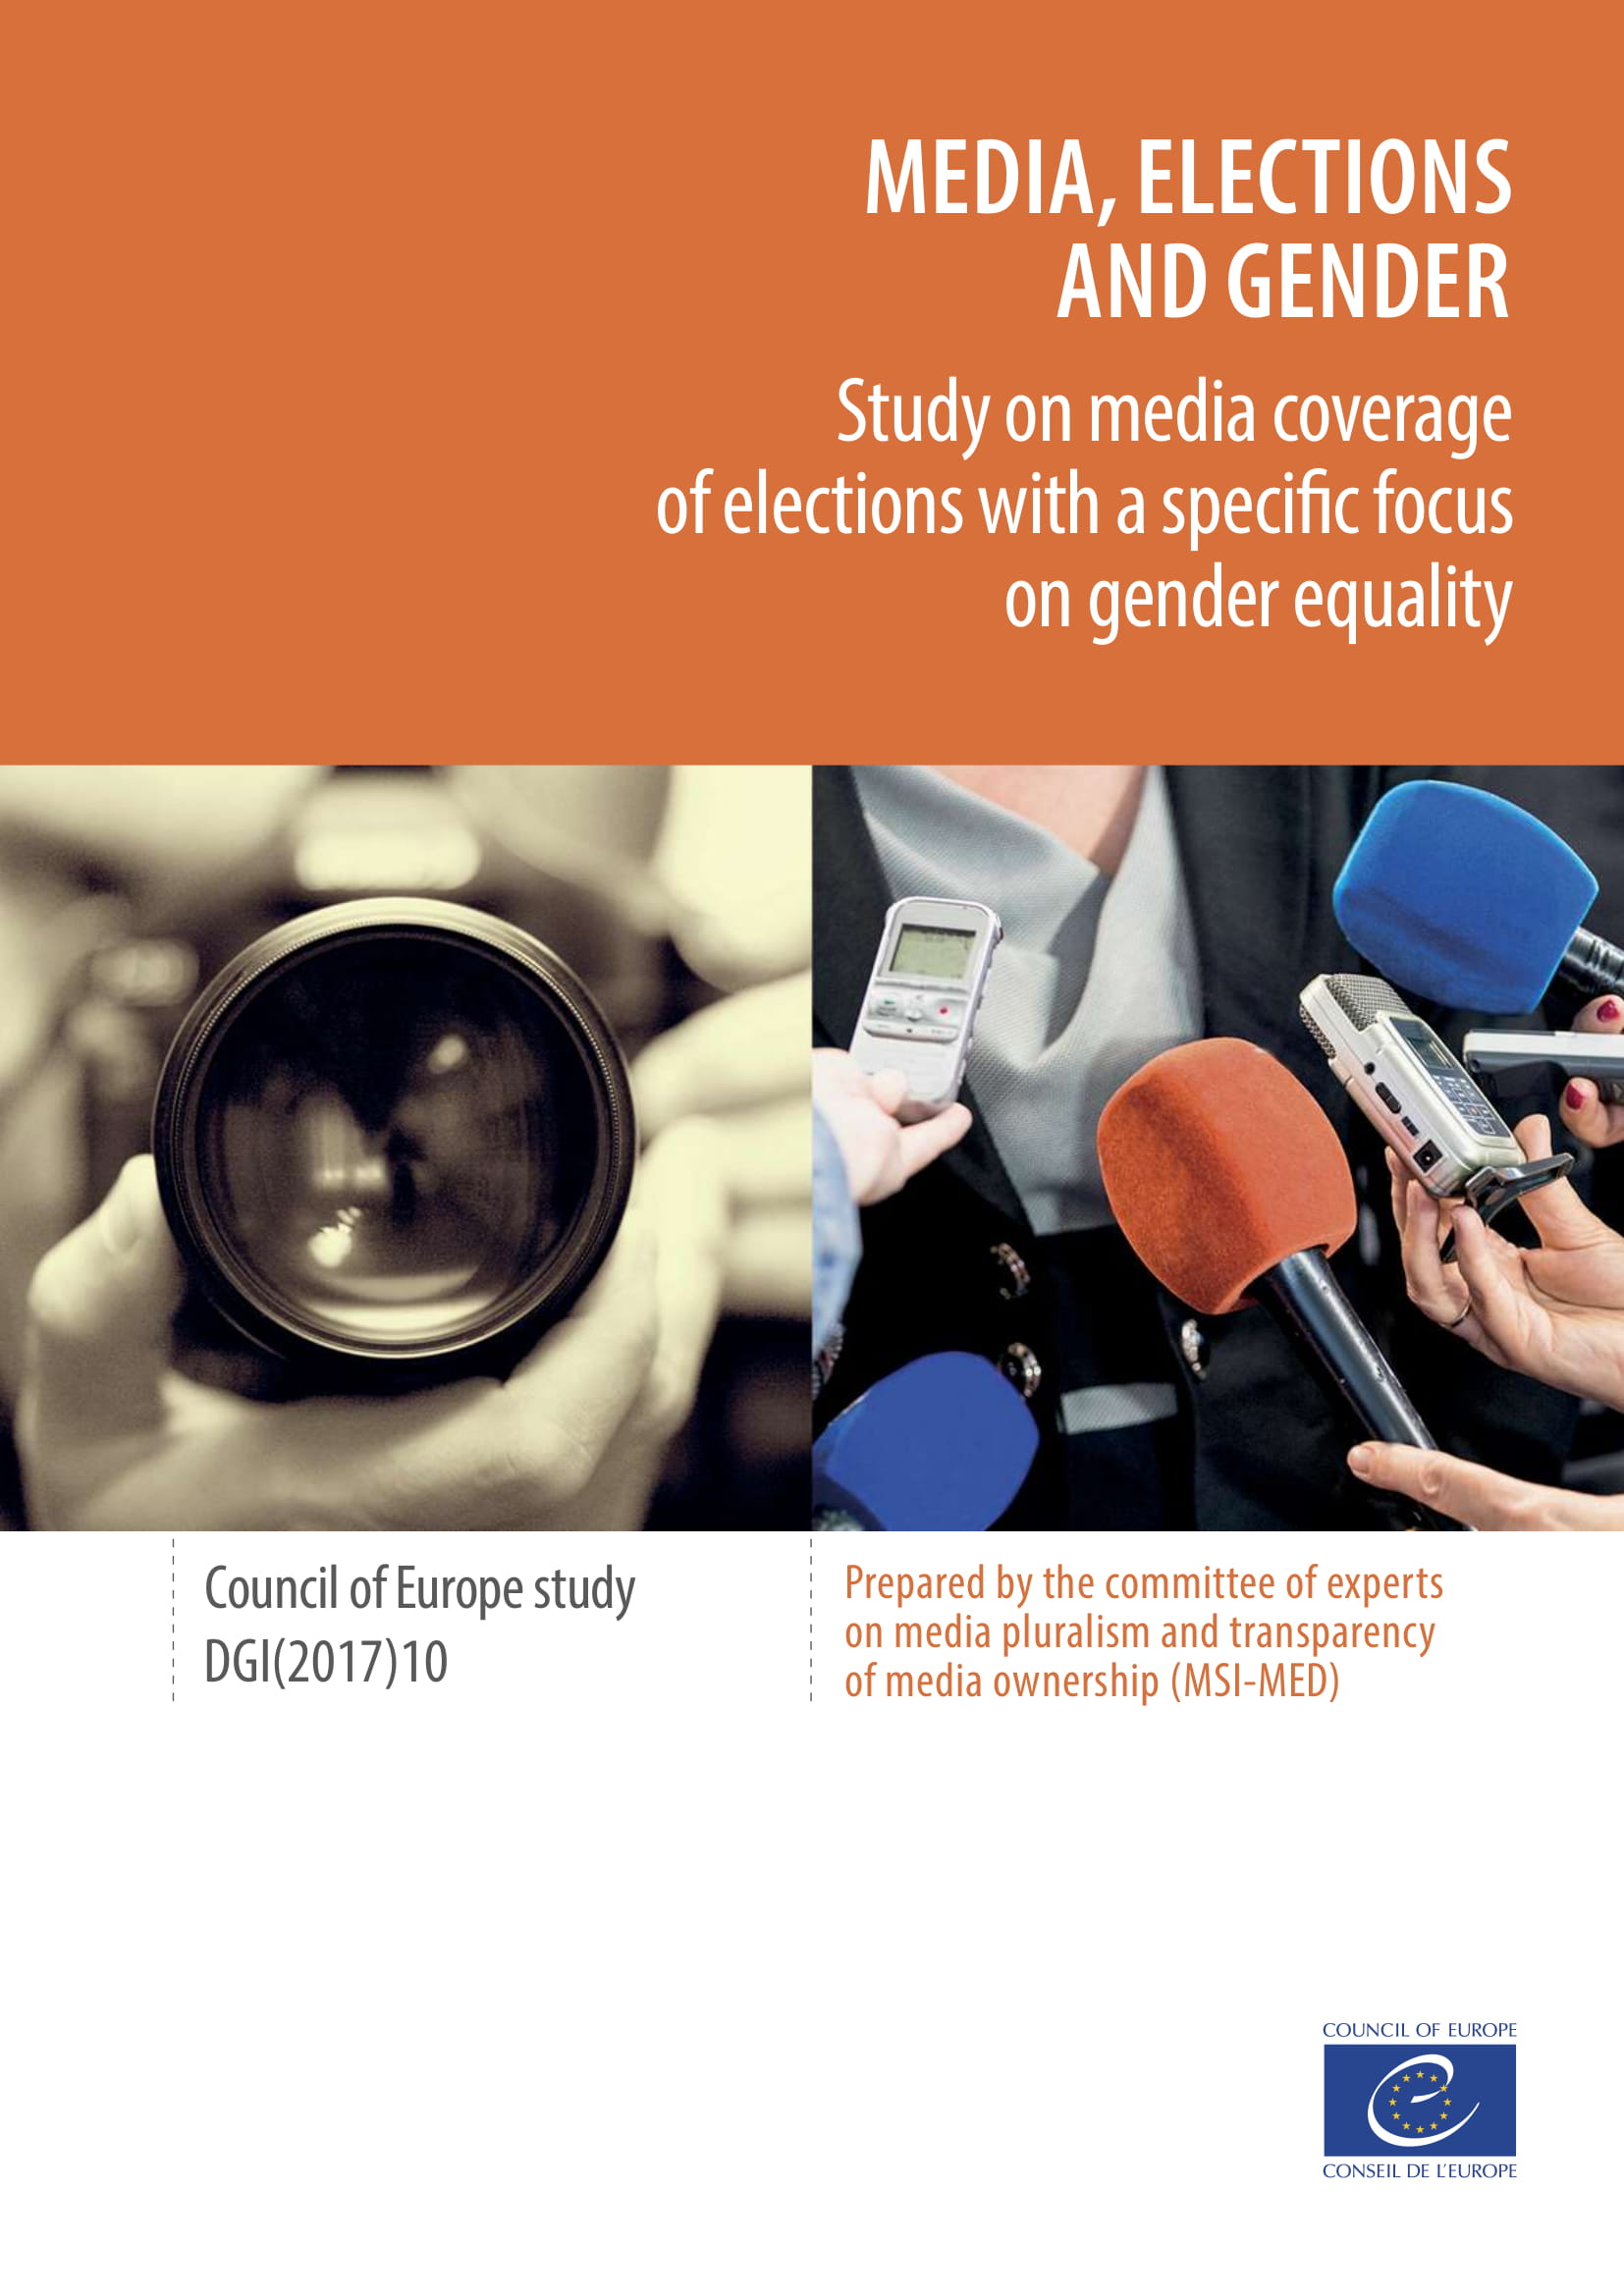 Media, Elections and Gender - Study on media coverage of elections with a specific focus on gender equality